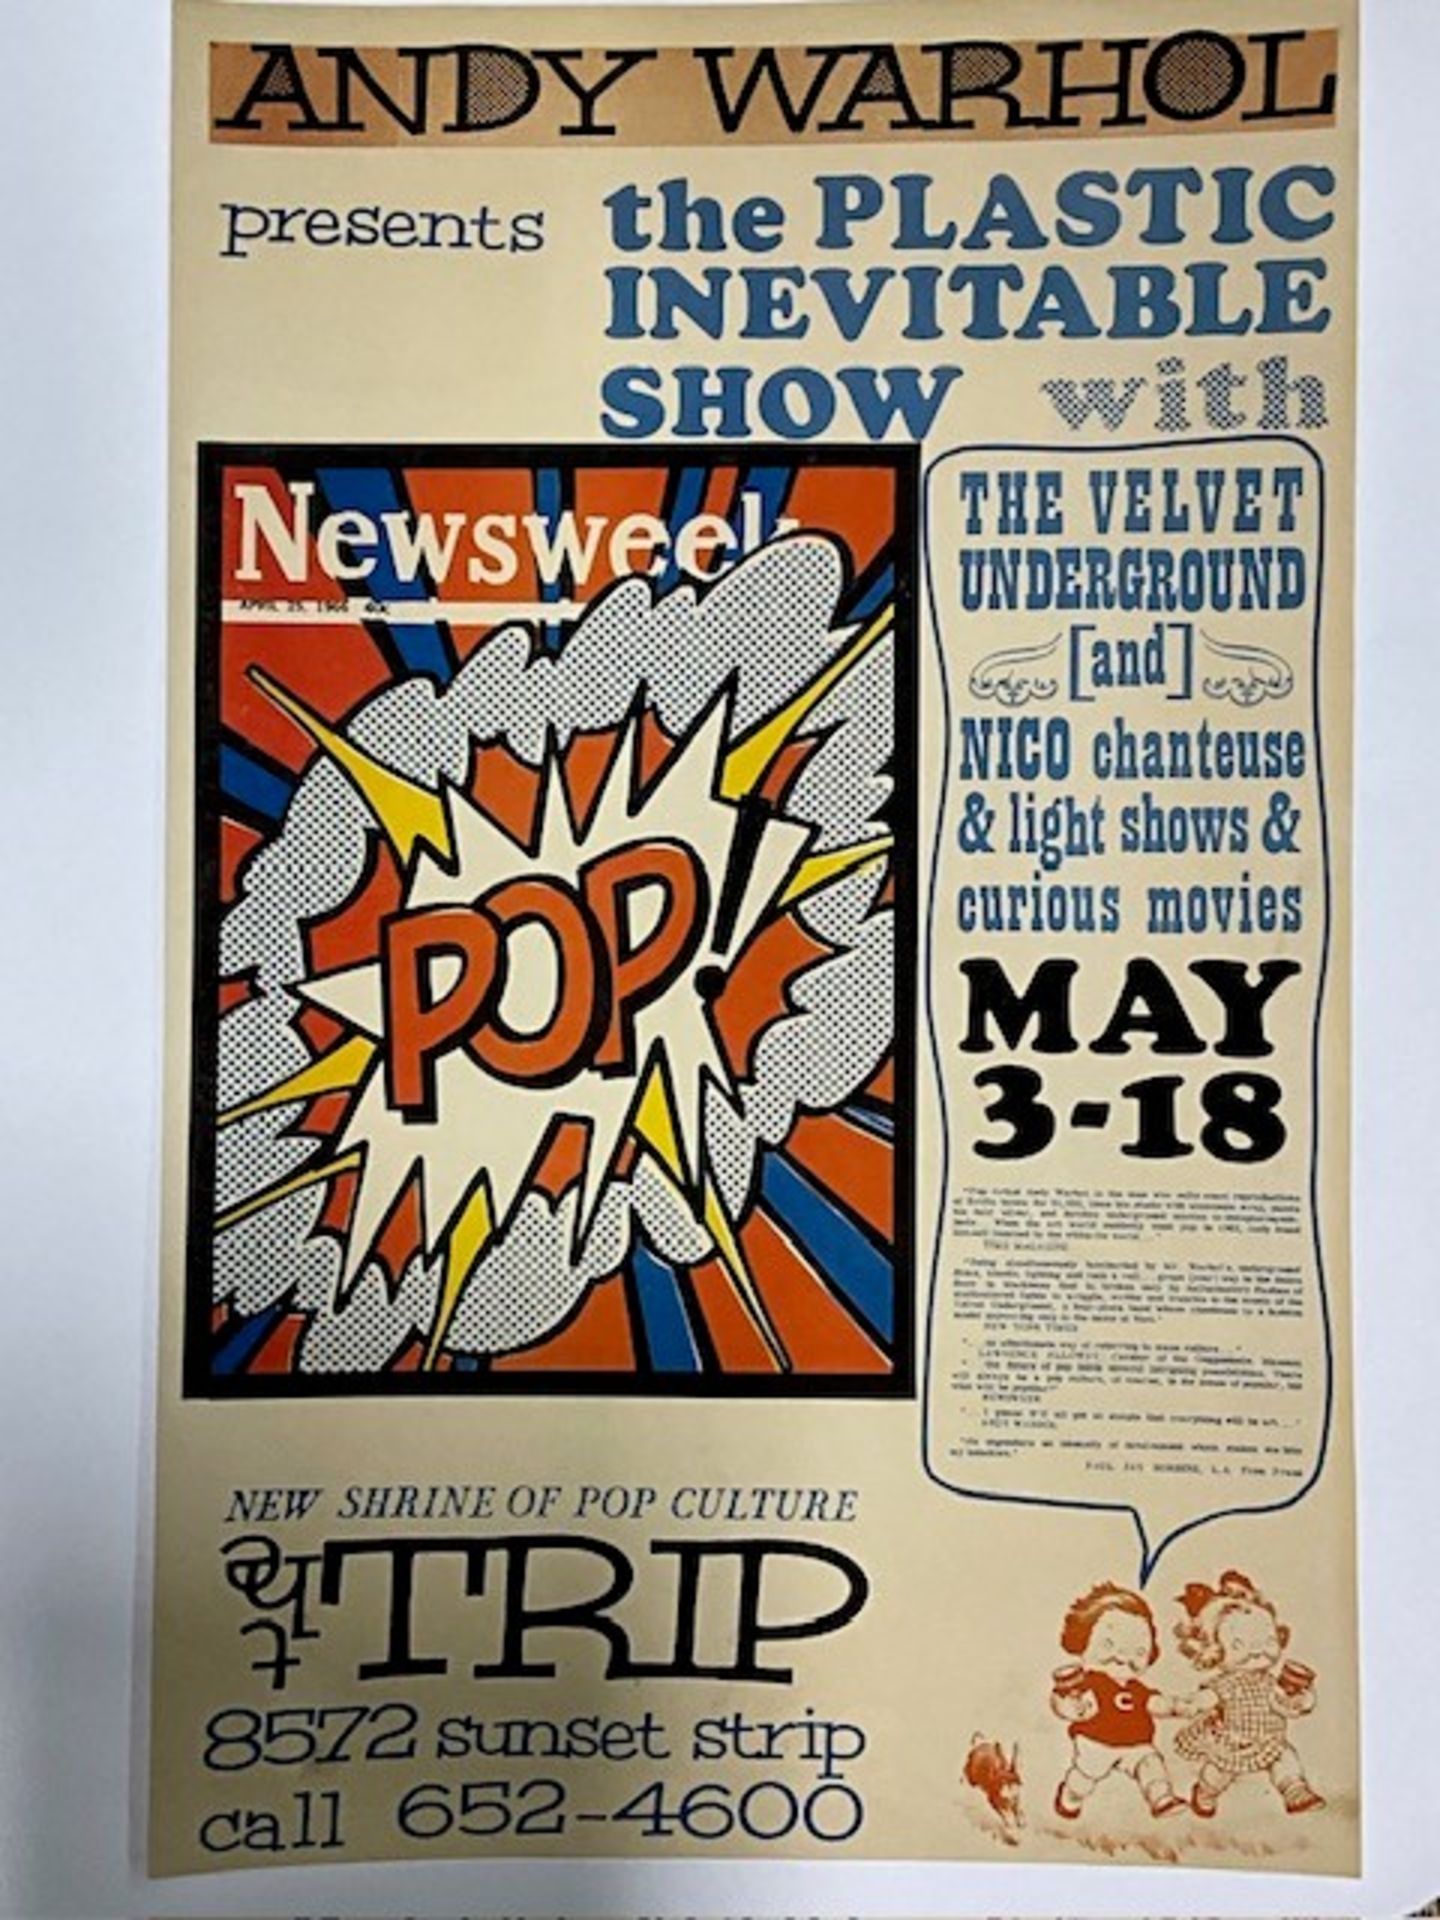 Andy Warhol The Plastic Inevitable Show Poster